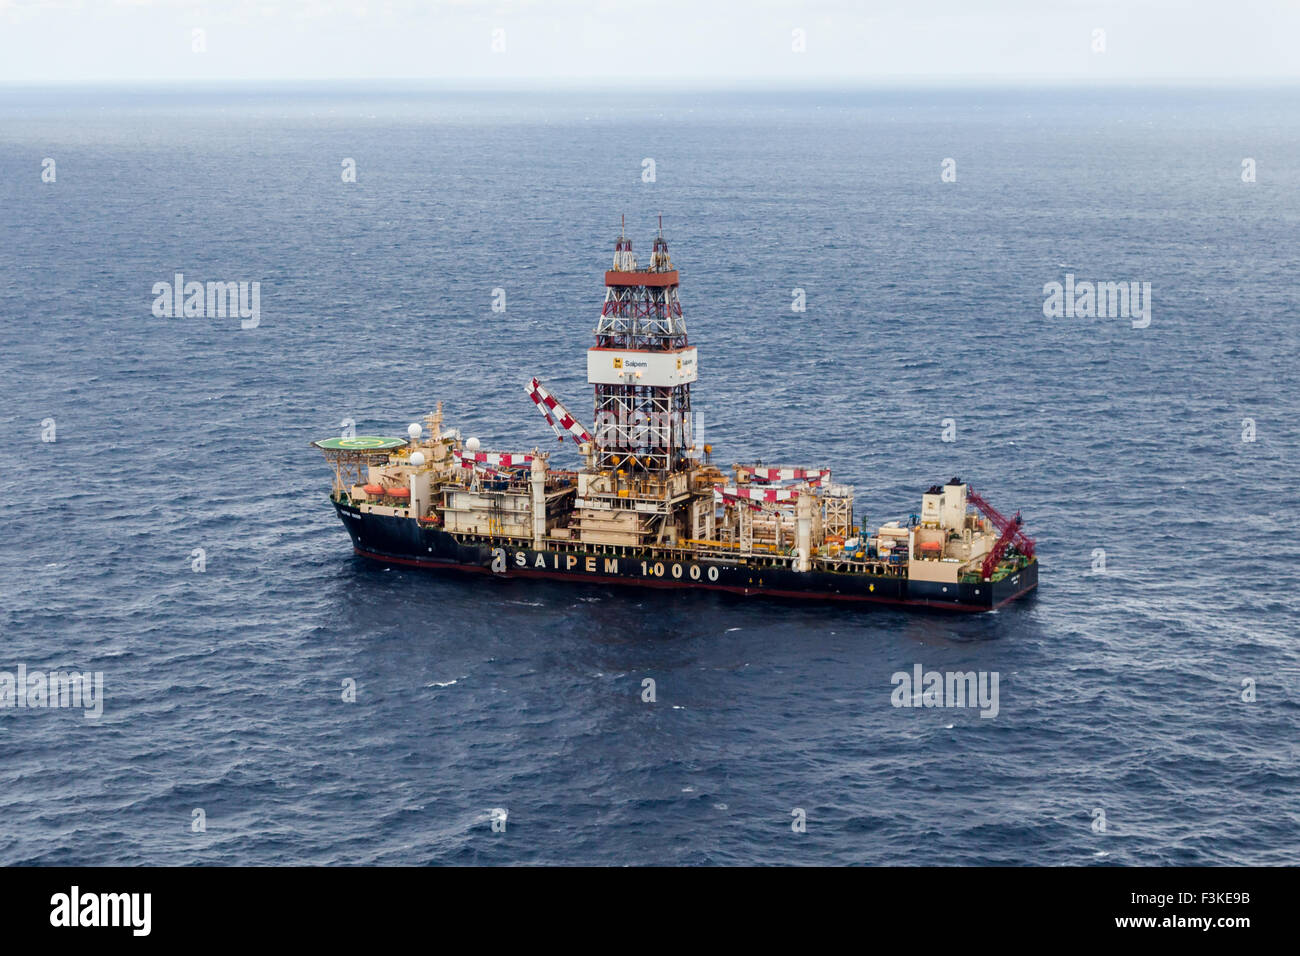 Oil drilling ship of the east coast of Africa Stock Photo